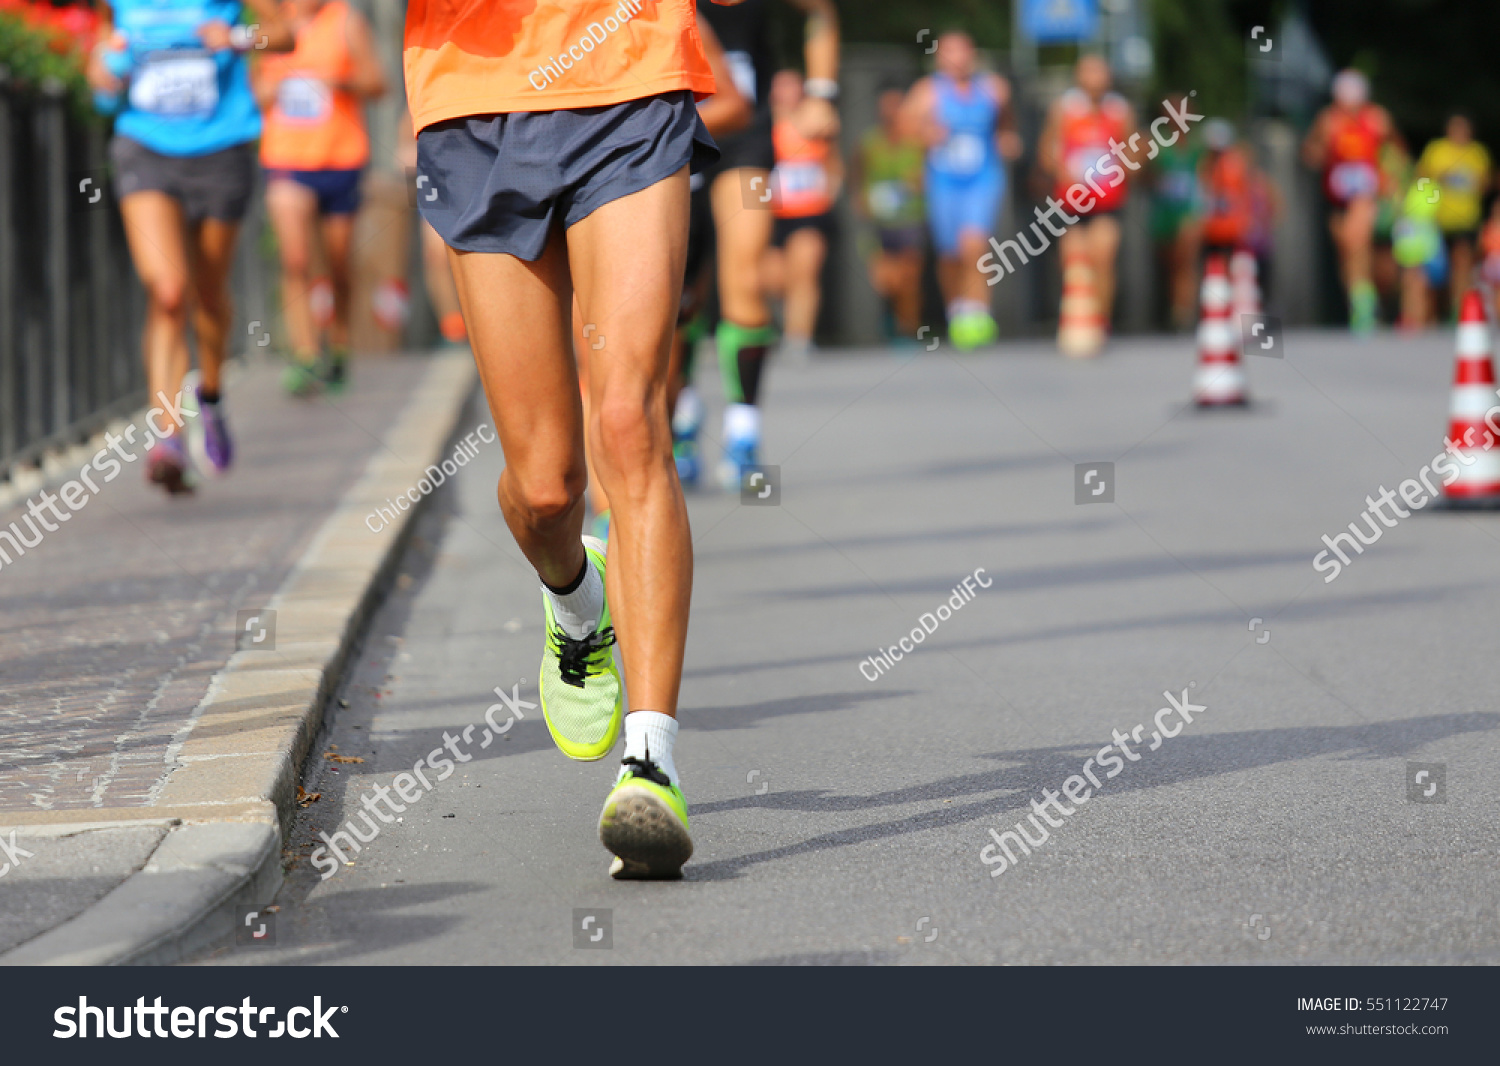 runner during race walking in the city with many athletes from all nations #551122747